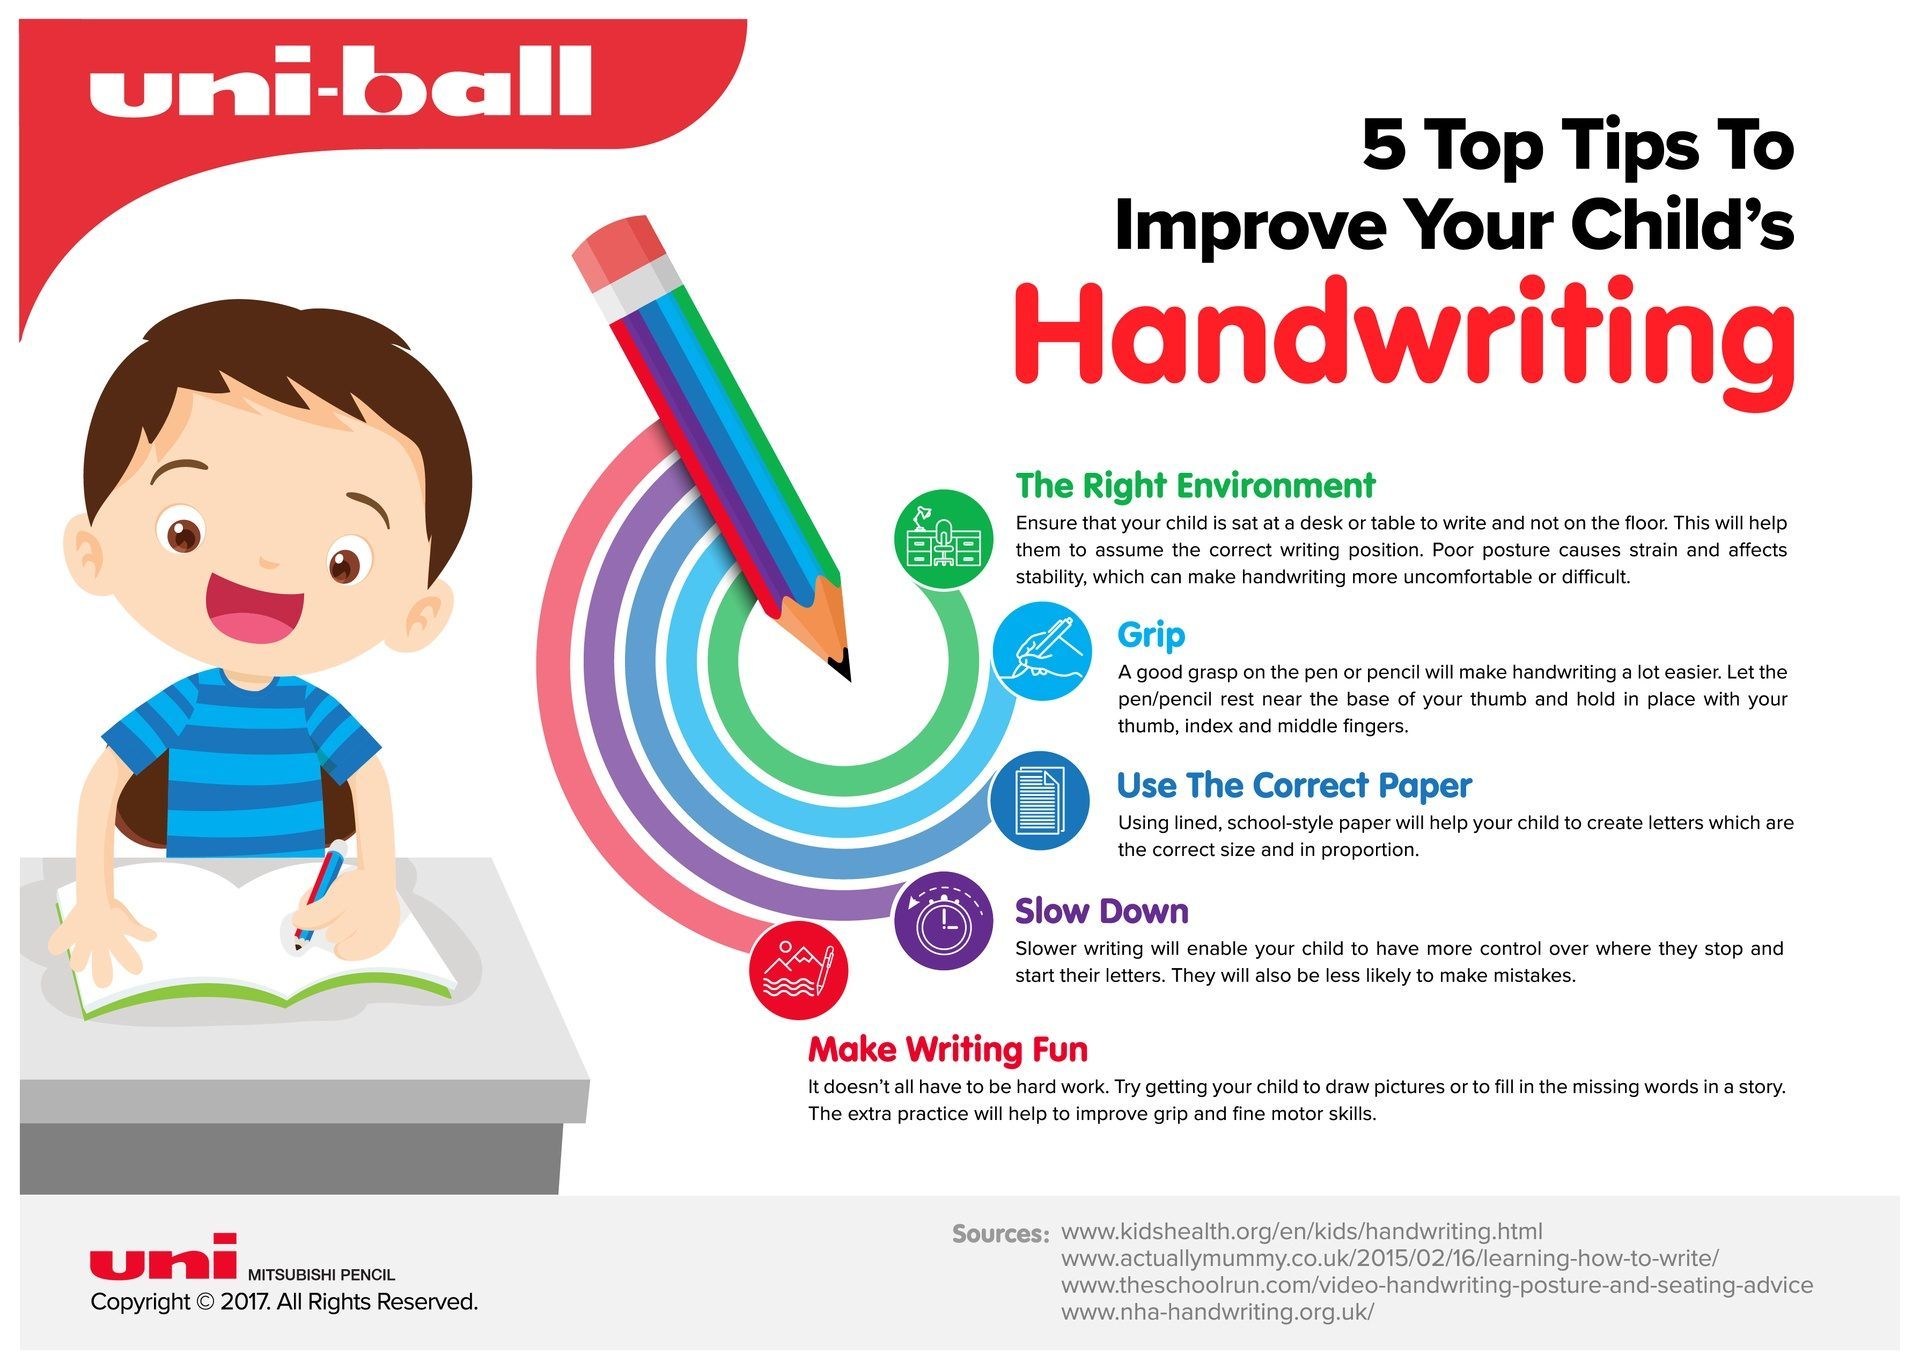 How To Improve Your Child’s Handwriting Infographic